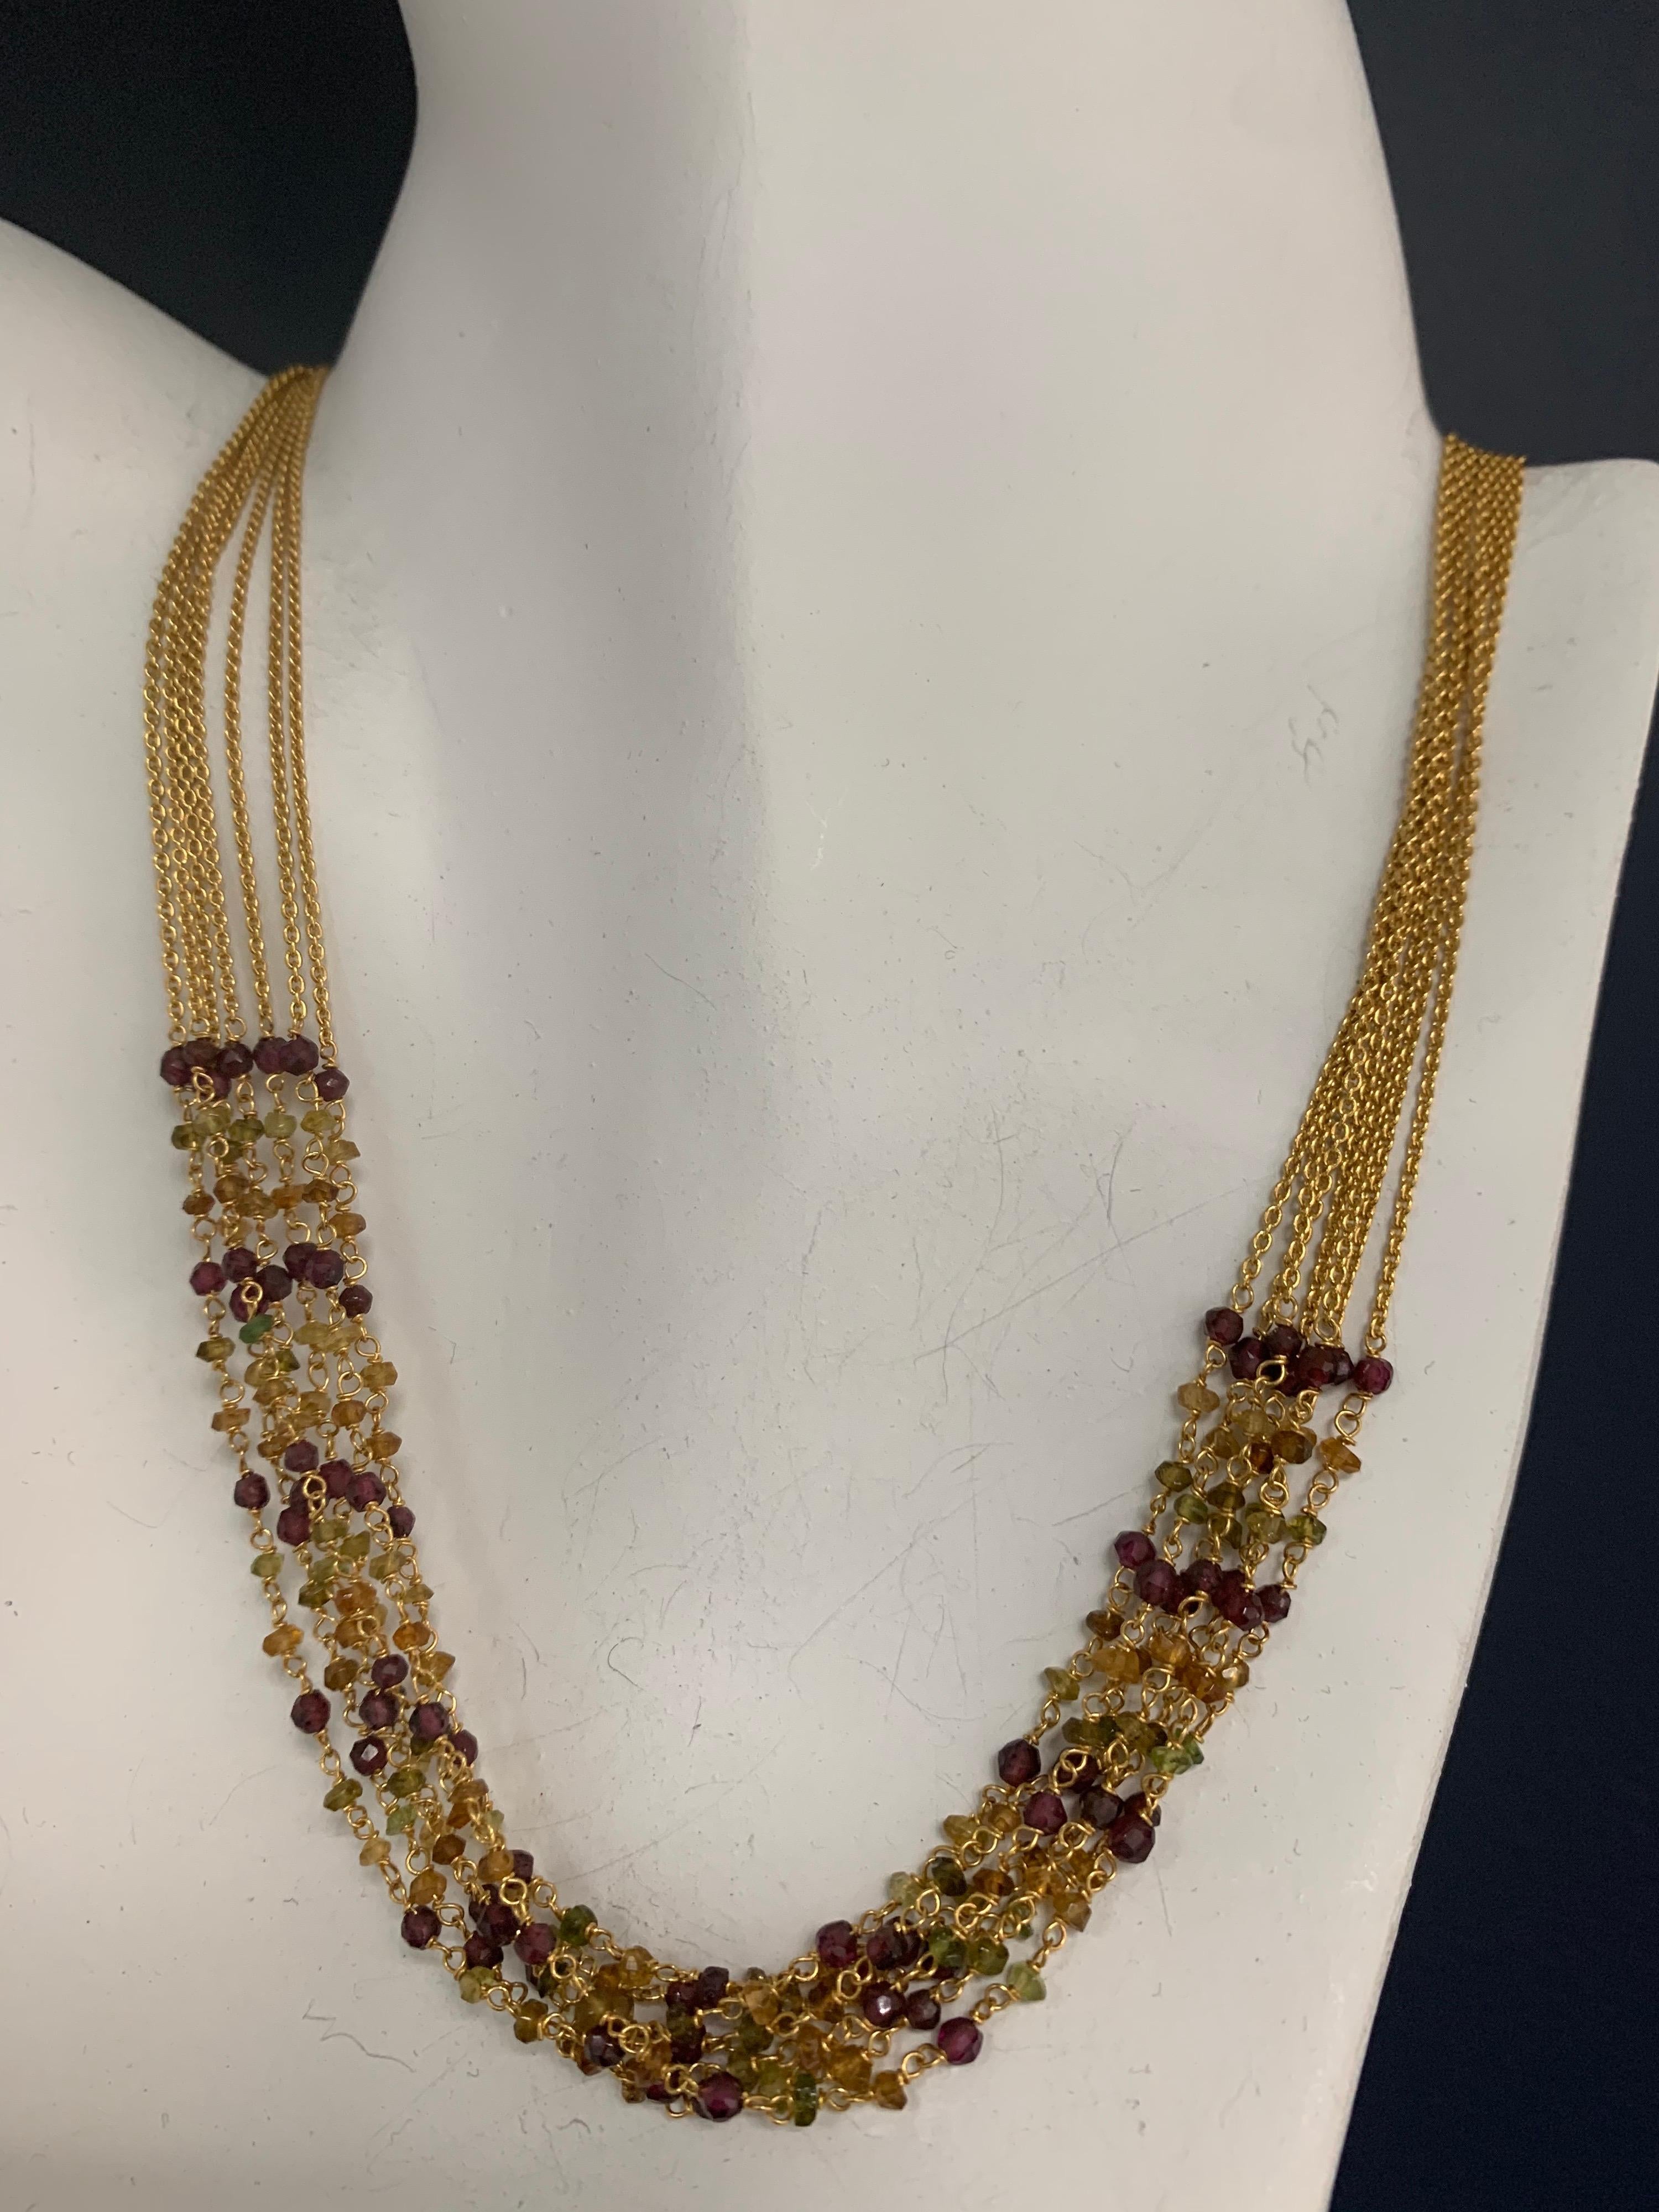 Modern Tanishq 22k Gold 31.31 Gram Necklace Earring Set Natural Colored Garnet In Good Condition For Sale In Los Angeles, CA